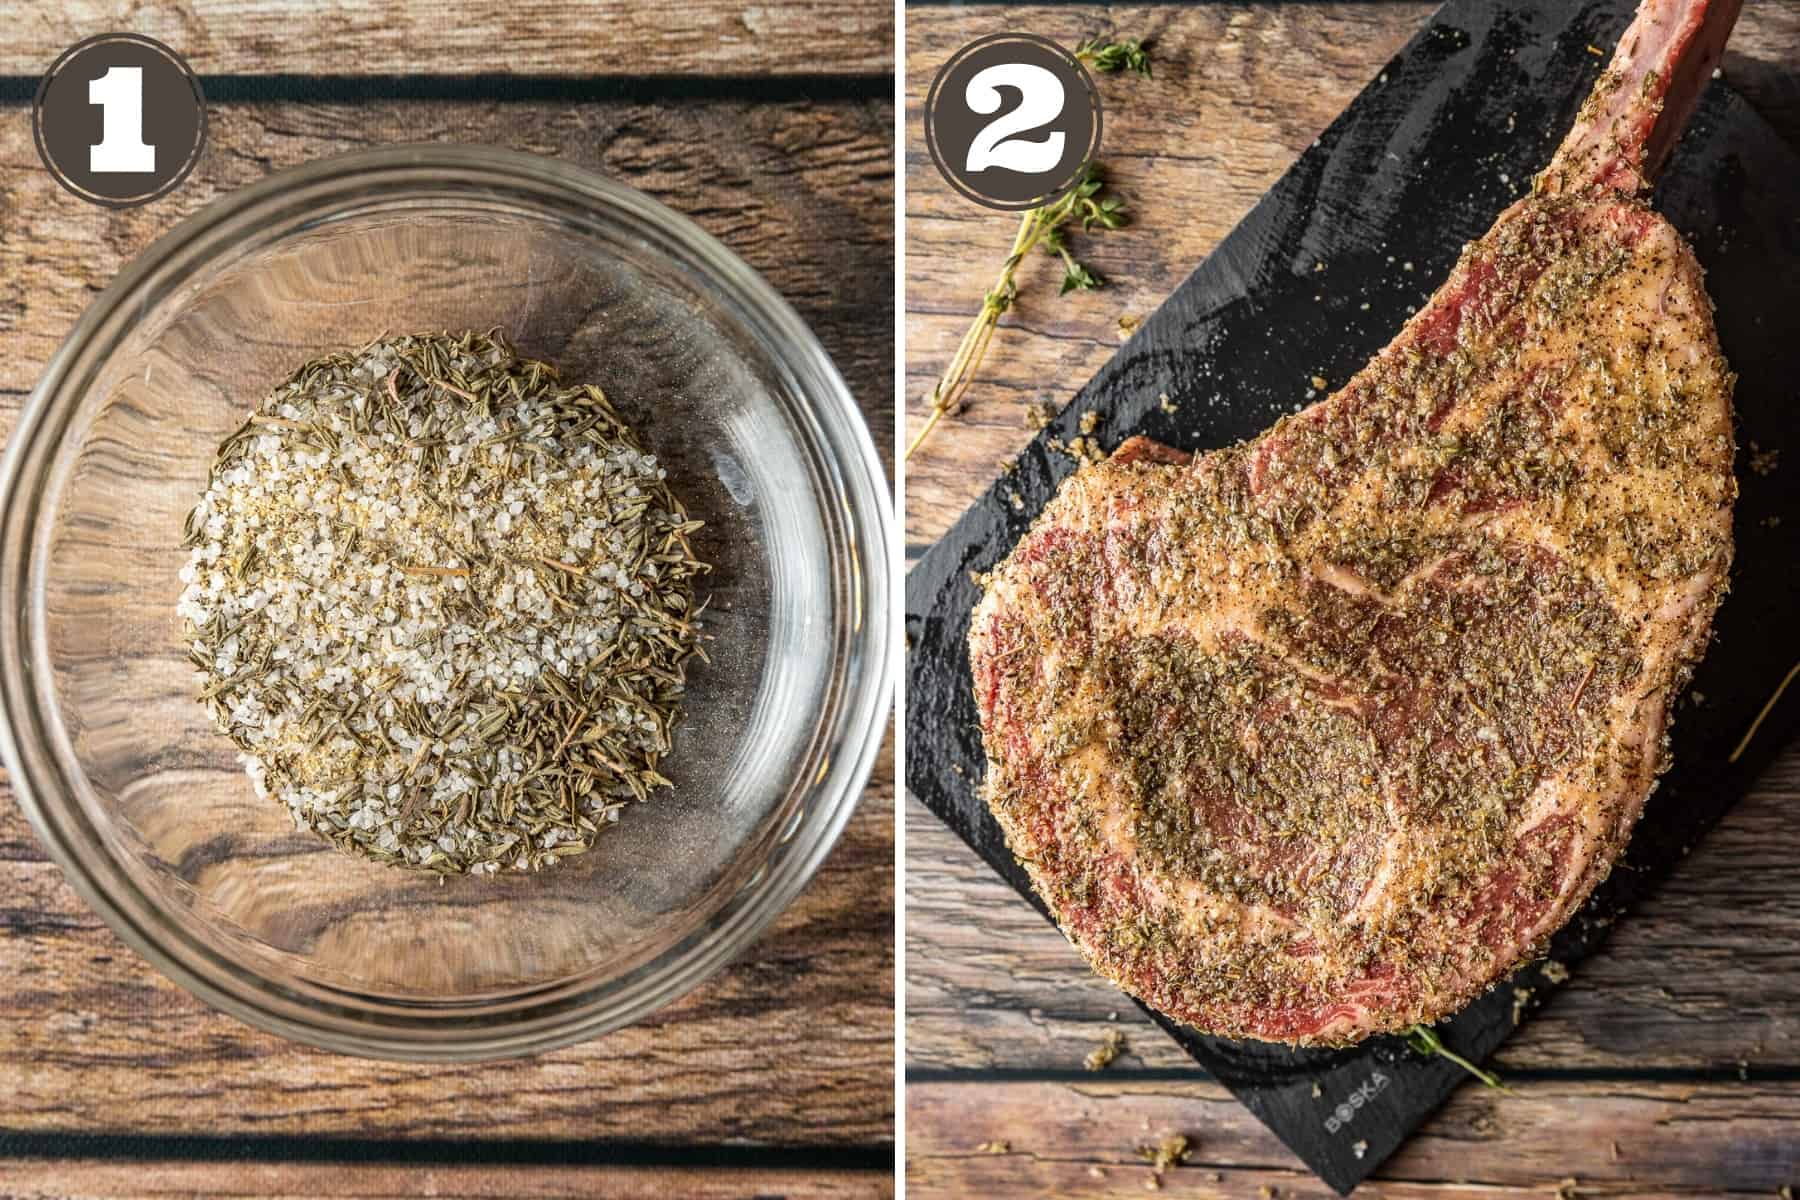 Side by side photos showing a dry rub in a bowl and a tomakawk steak coated in dry rub.  